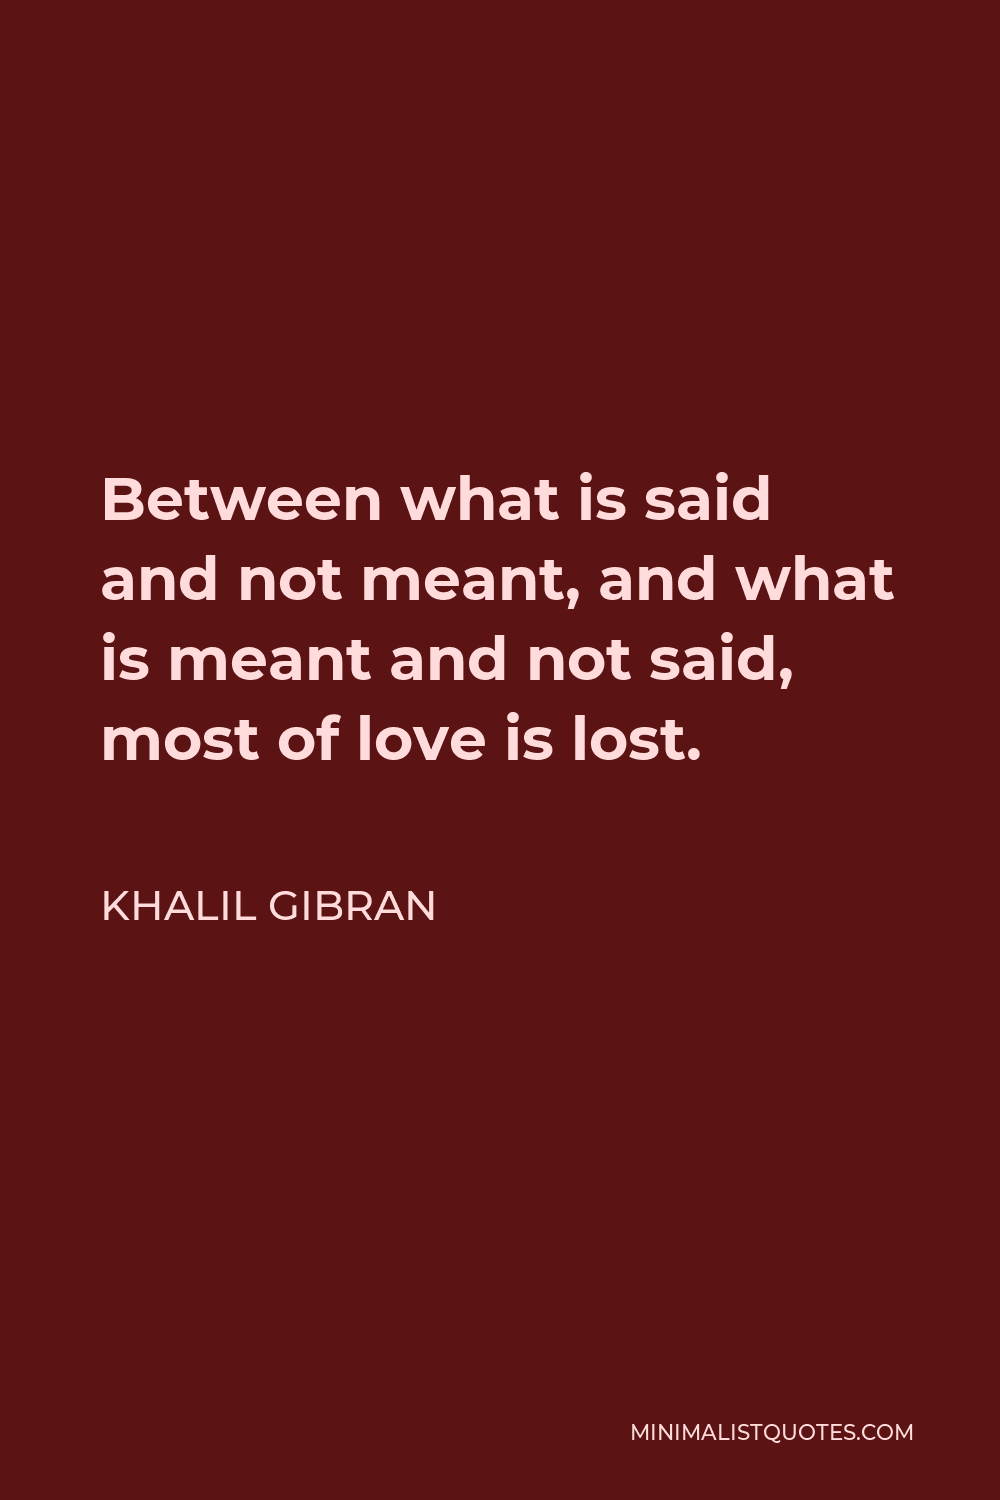 Khalil Gibran Quote: Between what is said and not meant, and what is ...